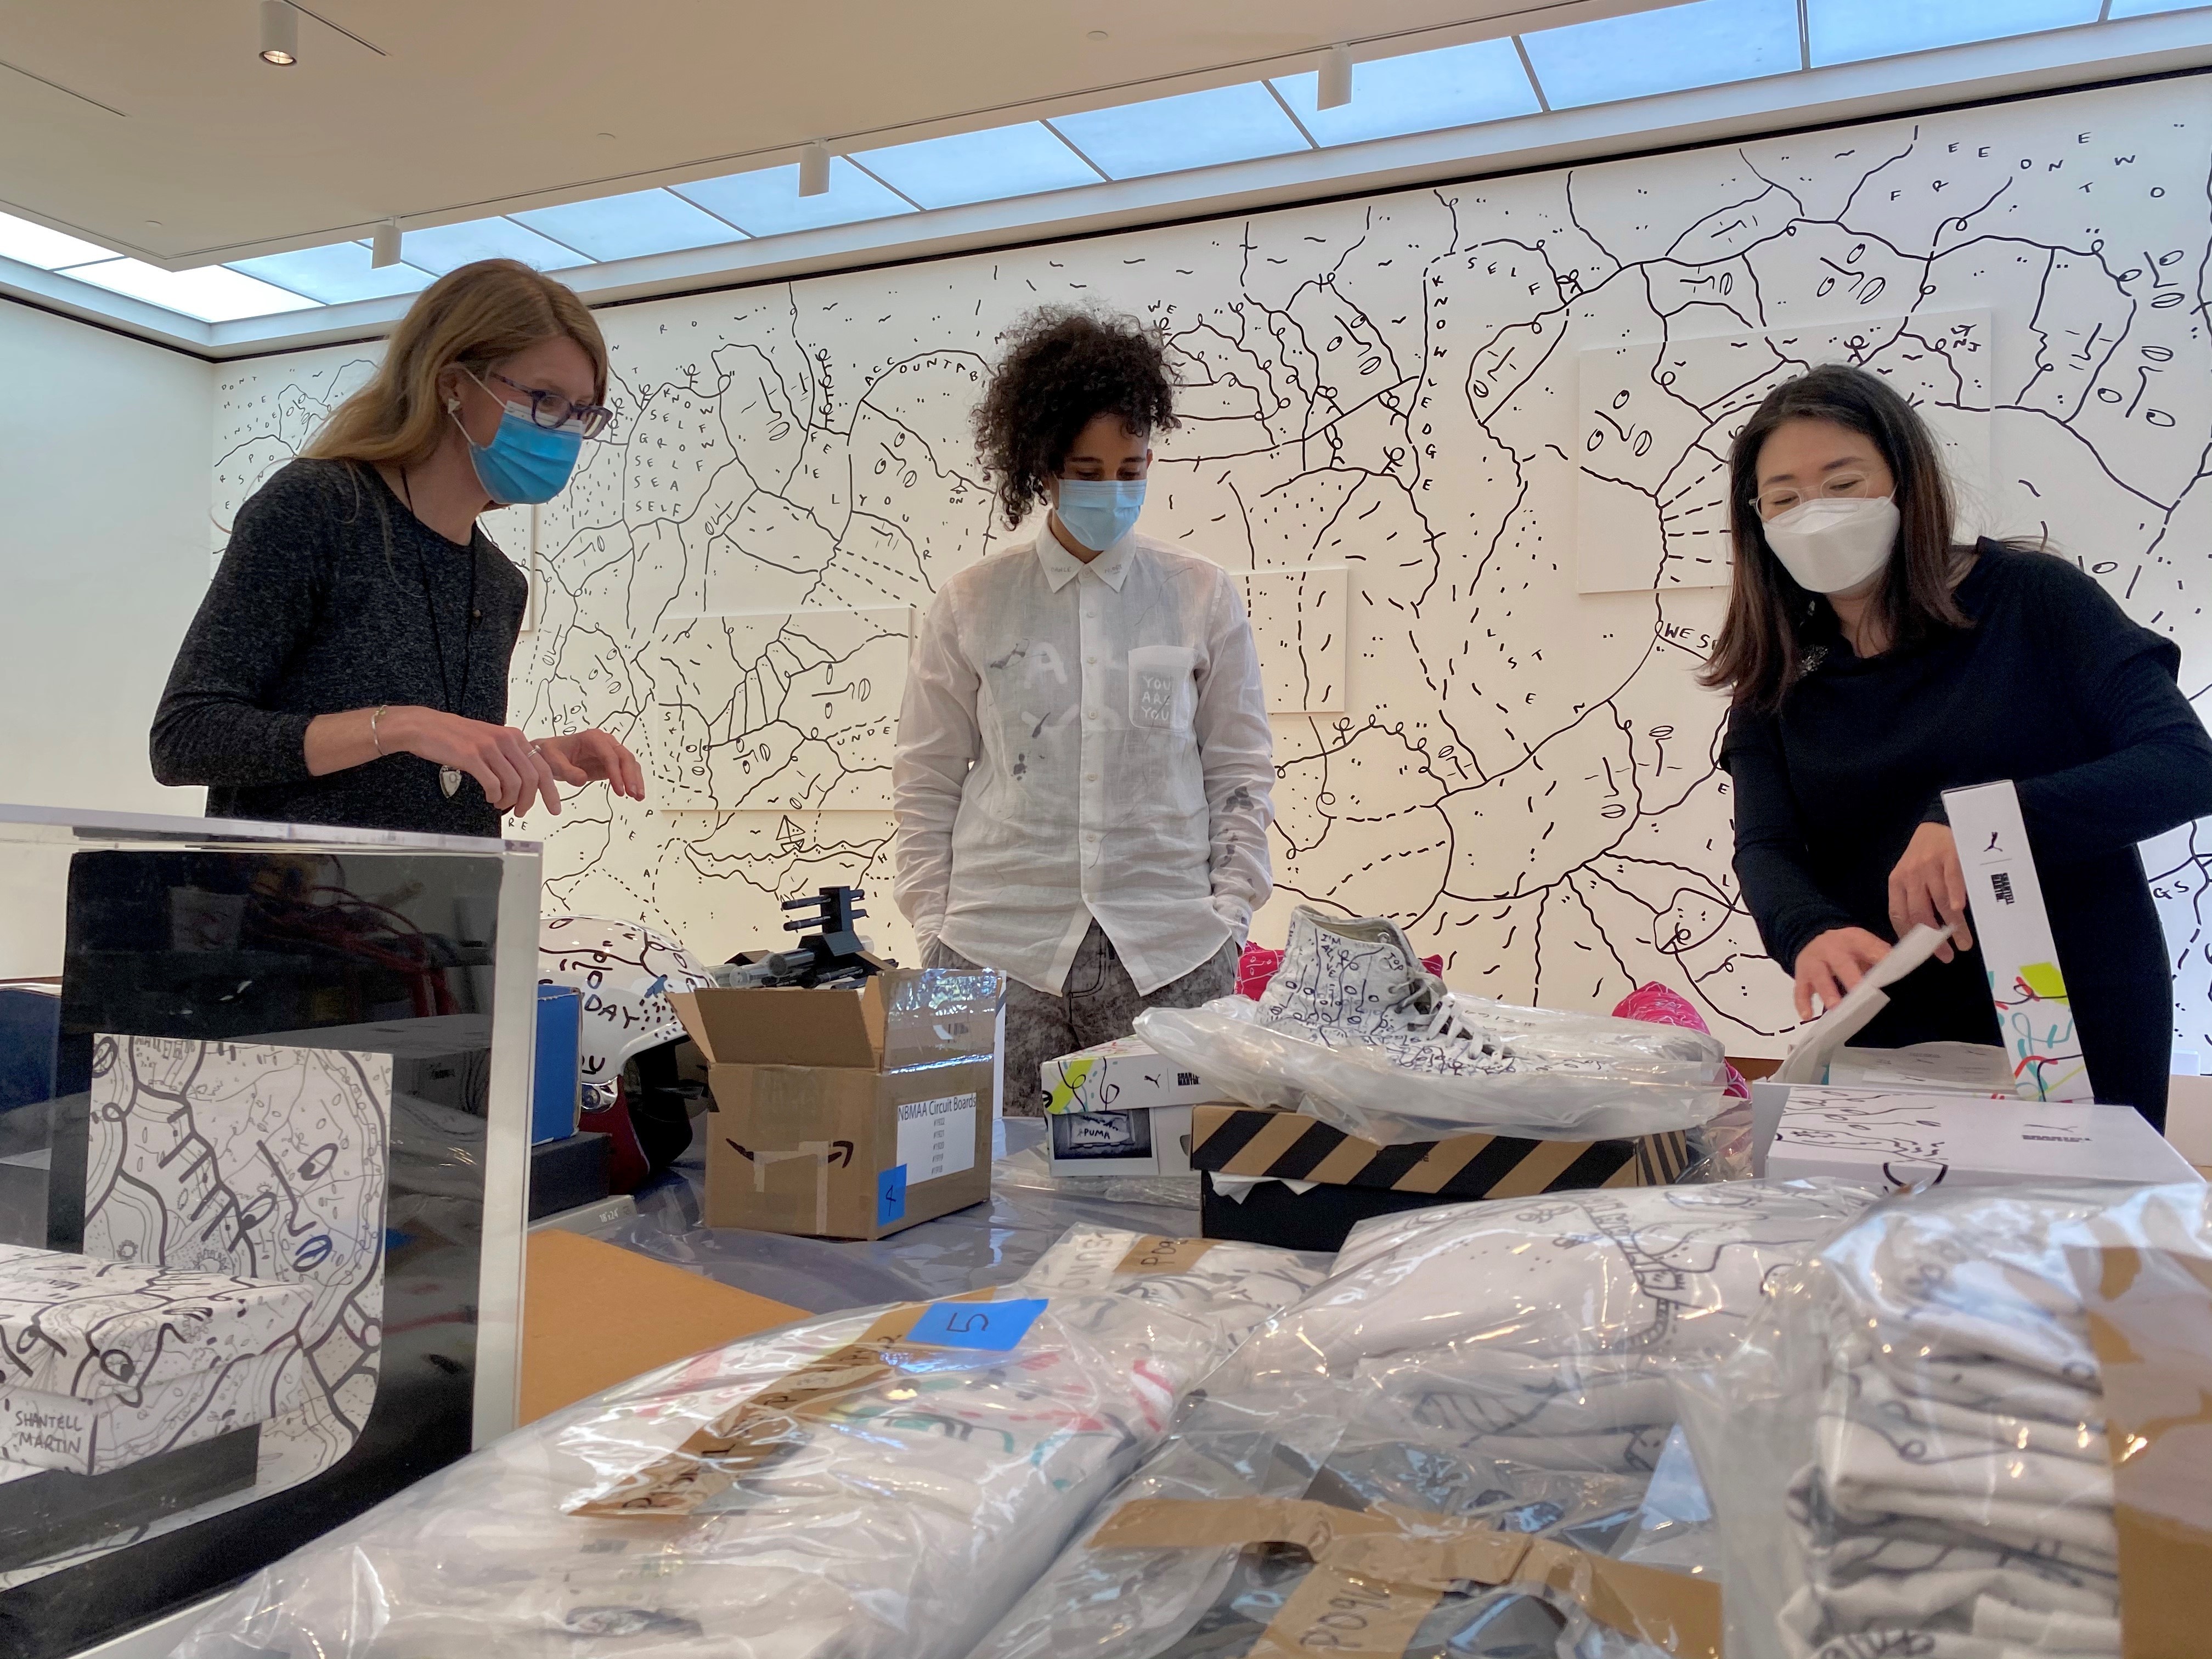 Pictured: Lisa Williams (left), during the install of <i>NEW/NOW: Shantell Martin </i>